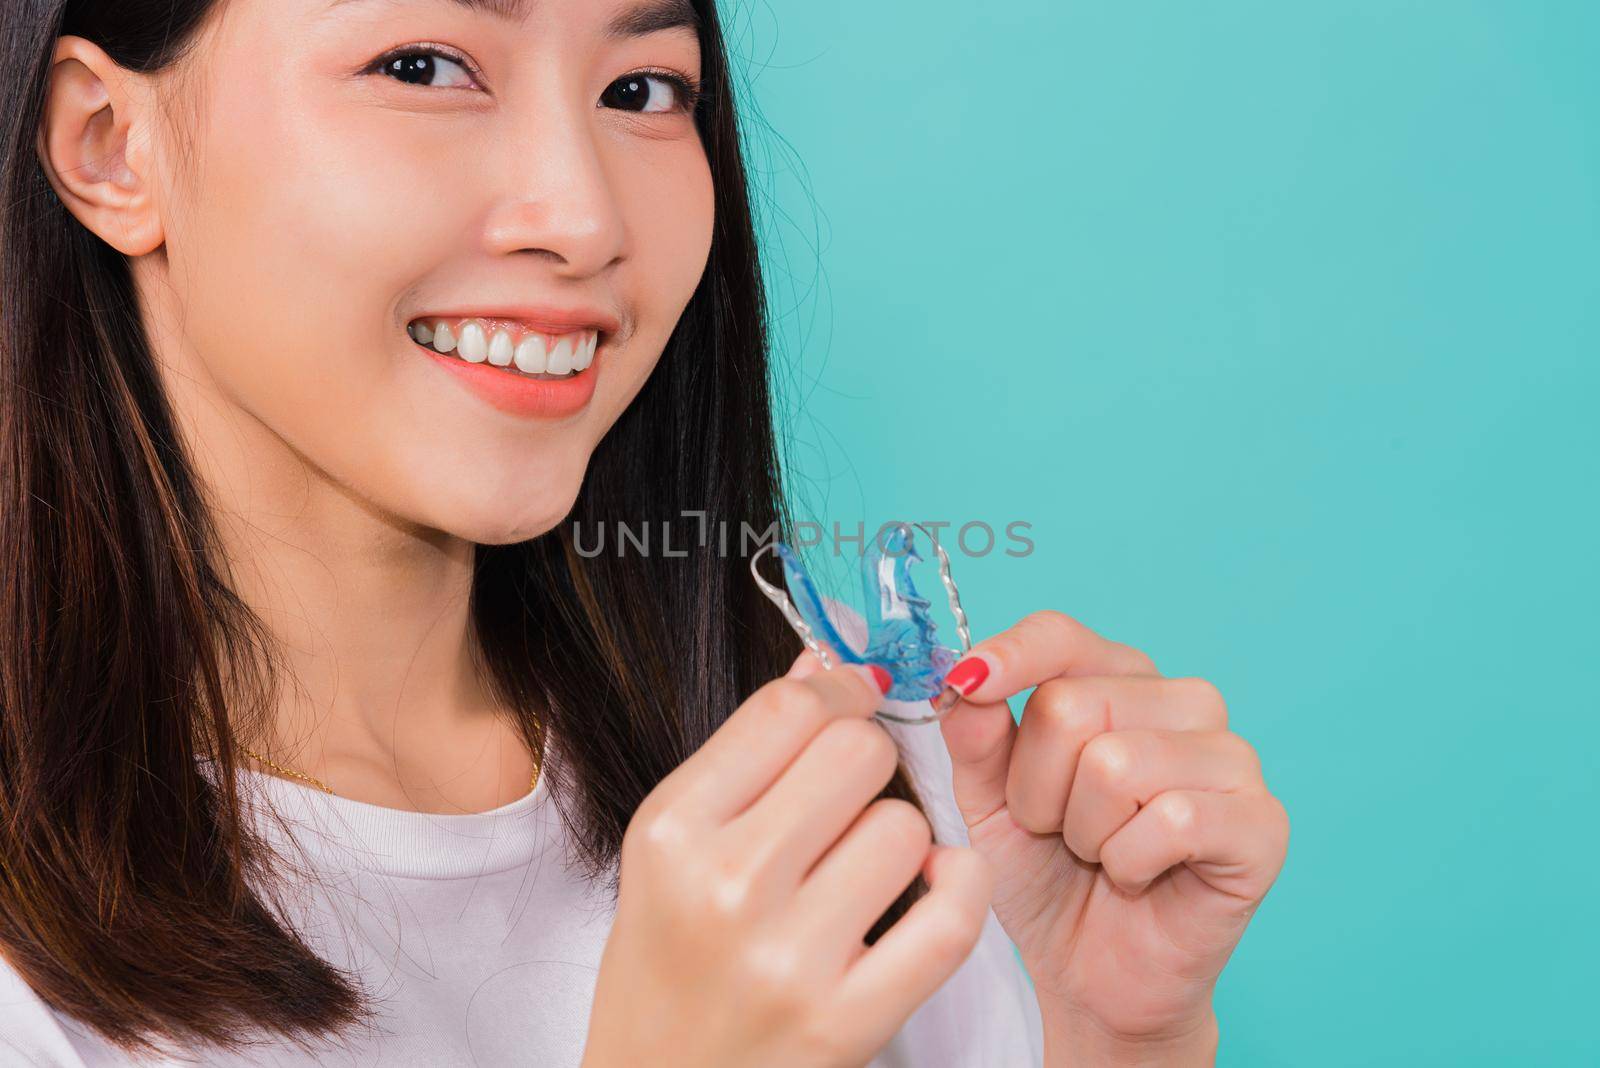 Teeth retaining tools after removable braces by Sorapop